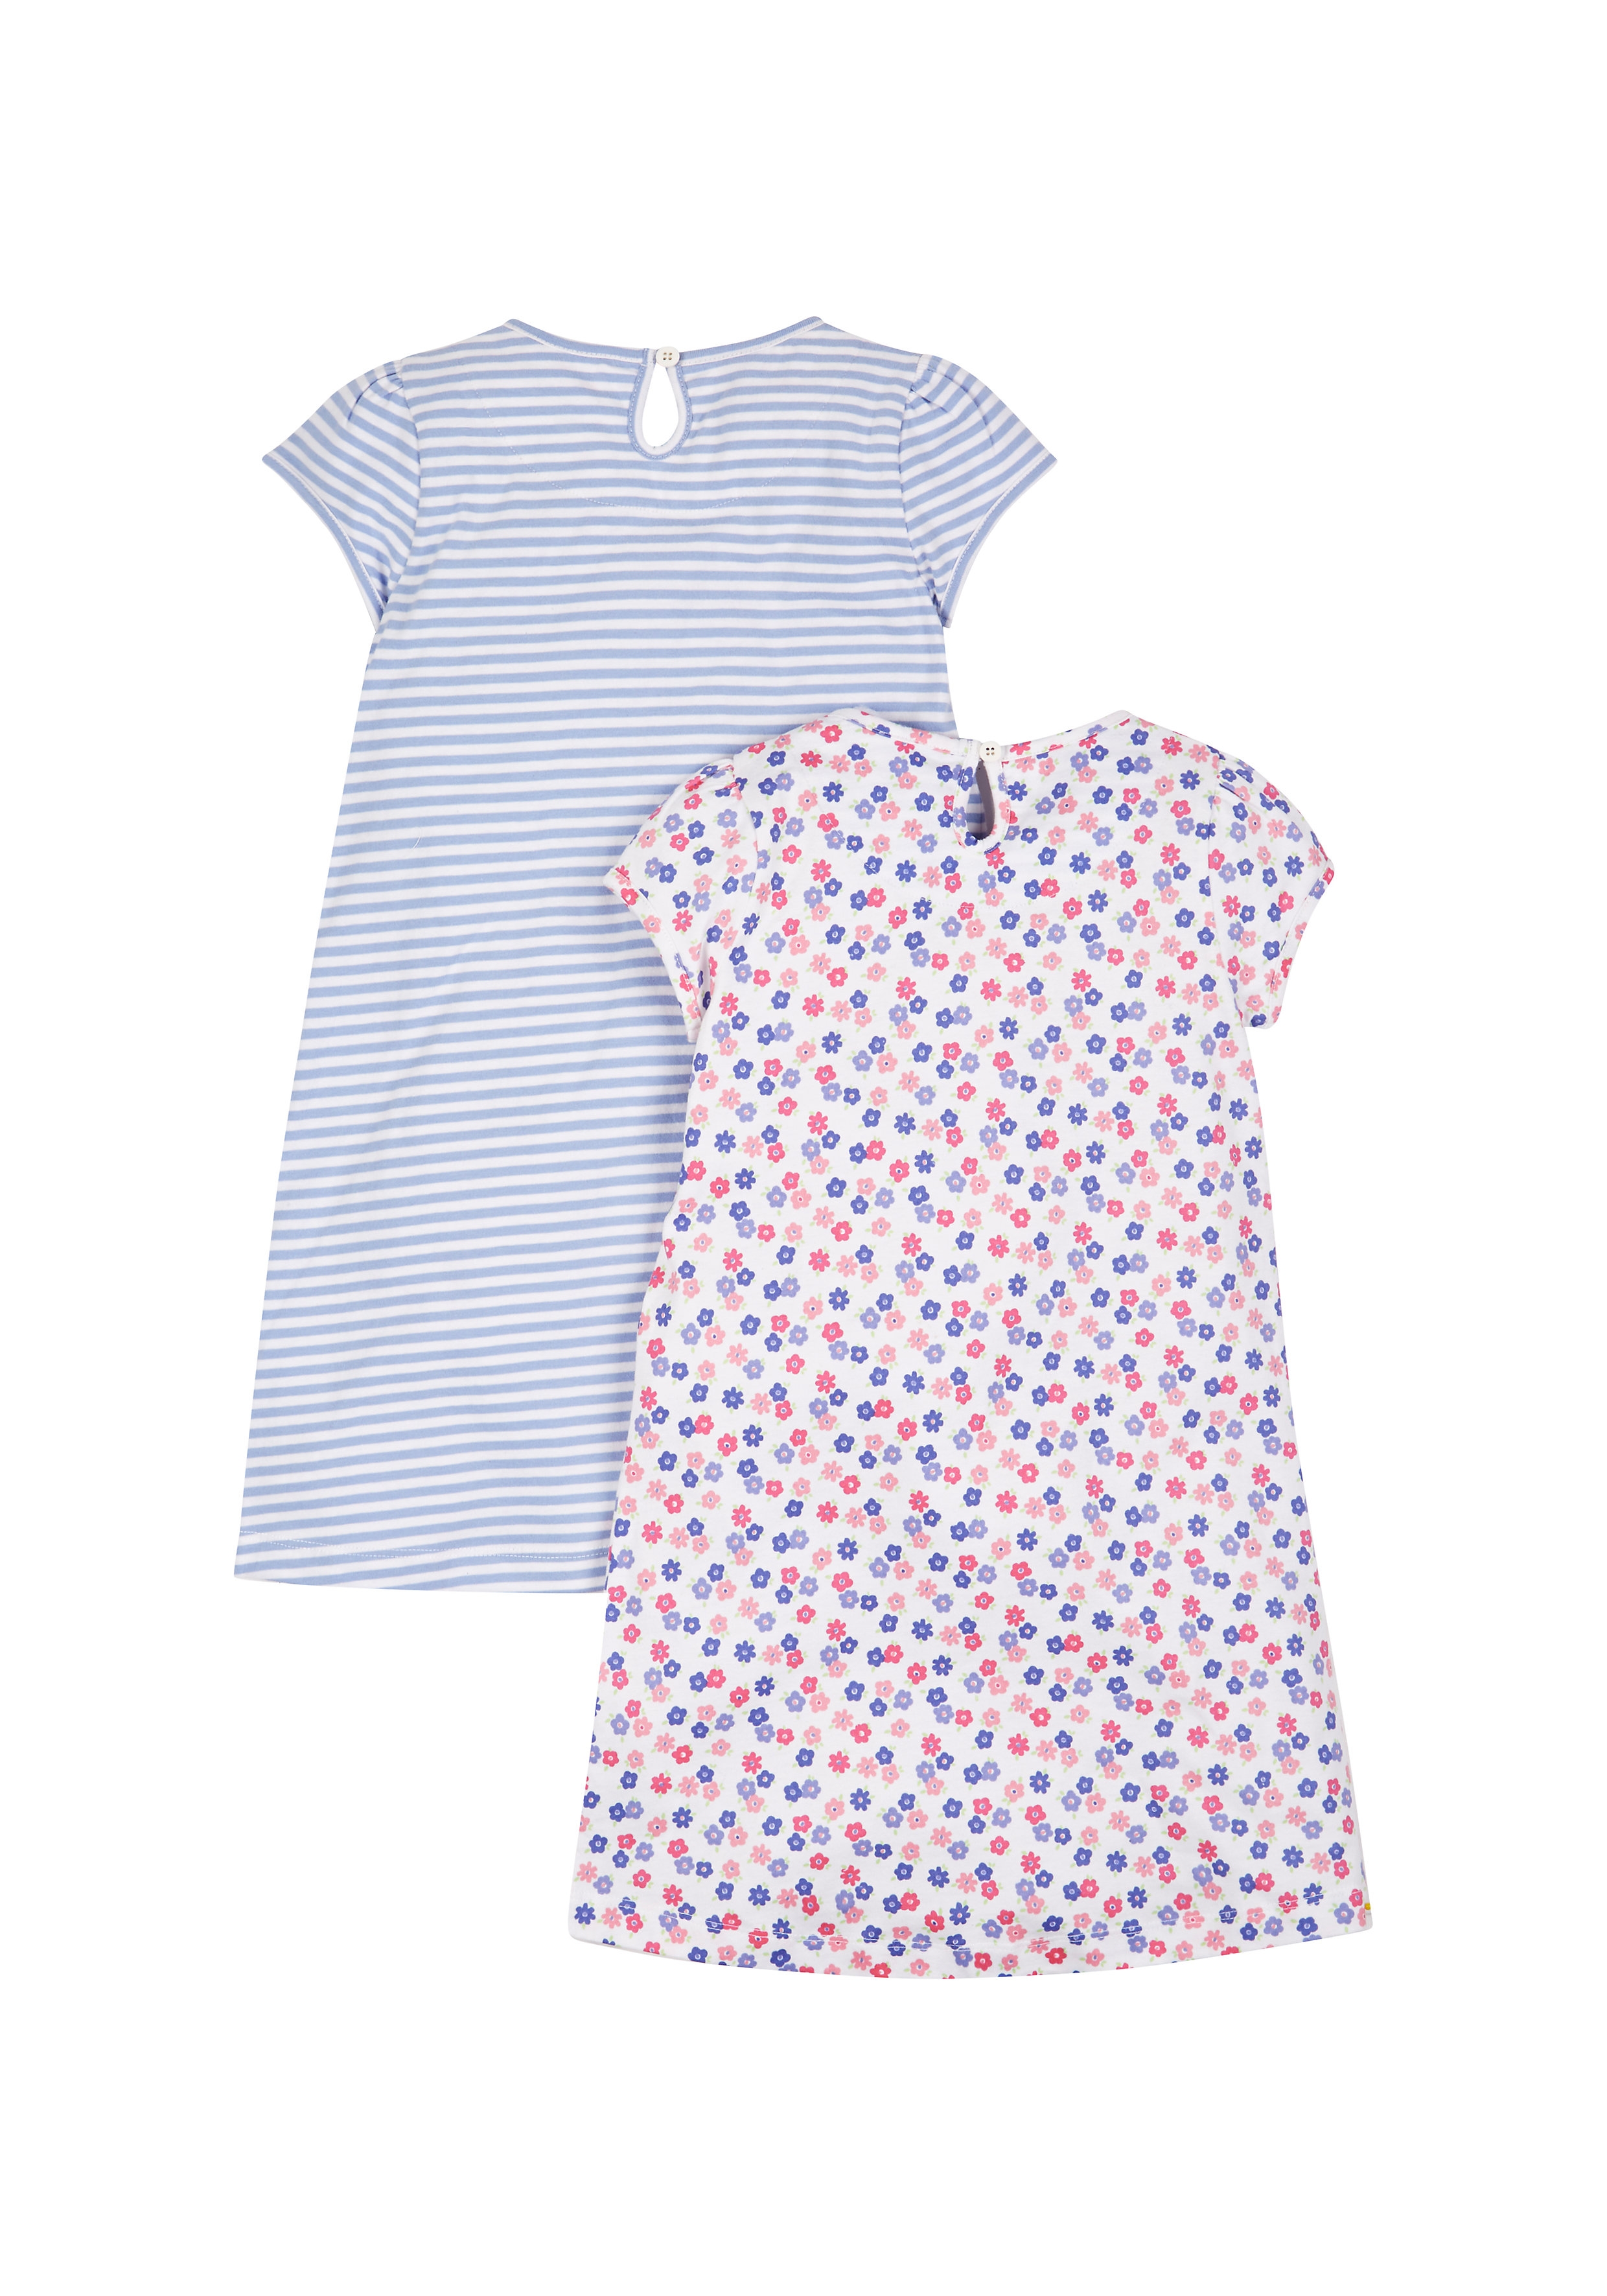 Mothercare | Girls Floral And Striped Nightdresses - Pack Of 2 1